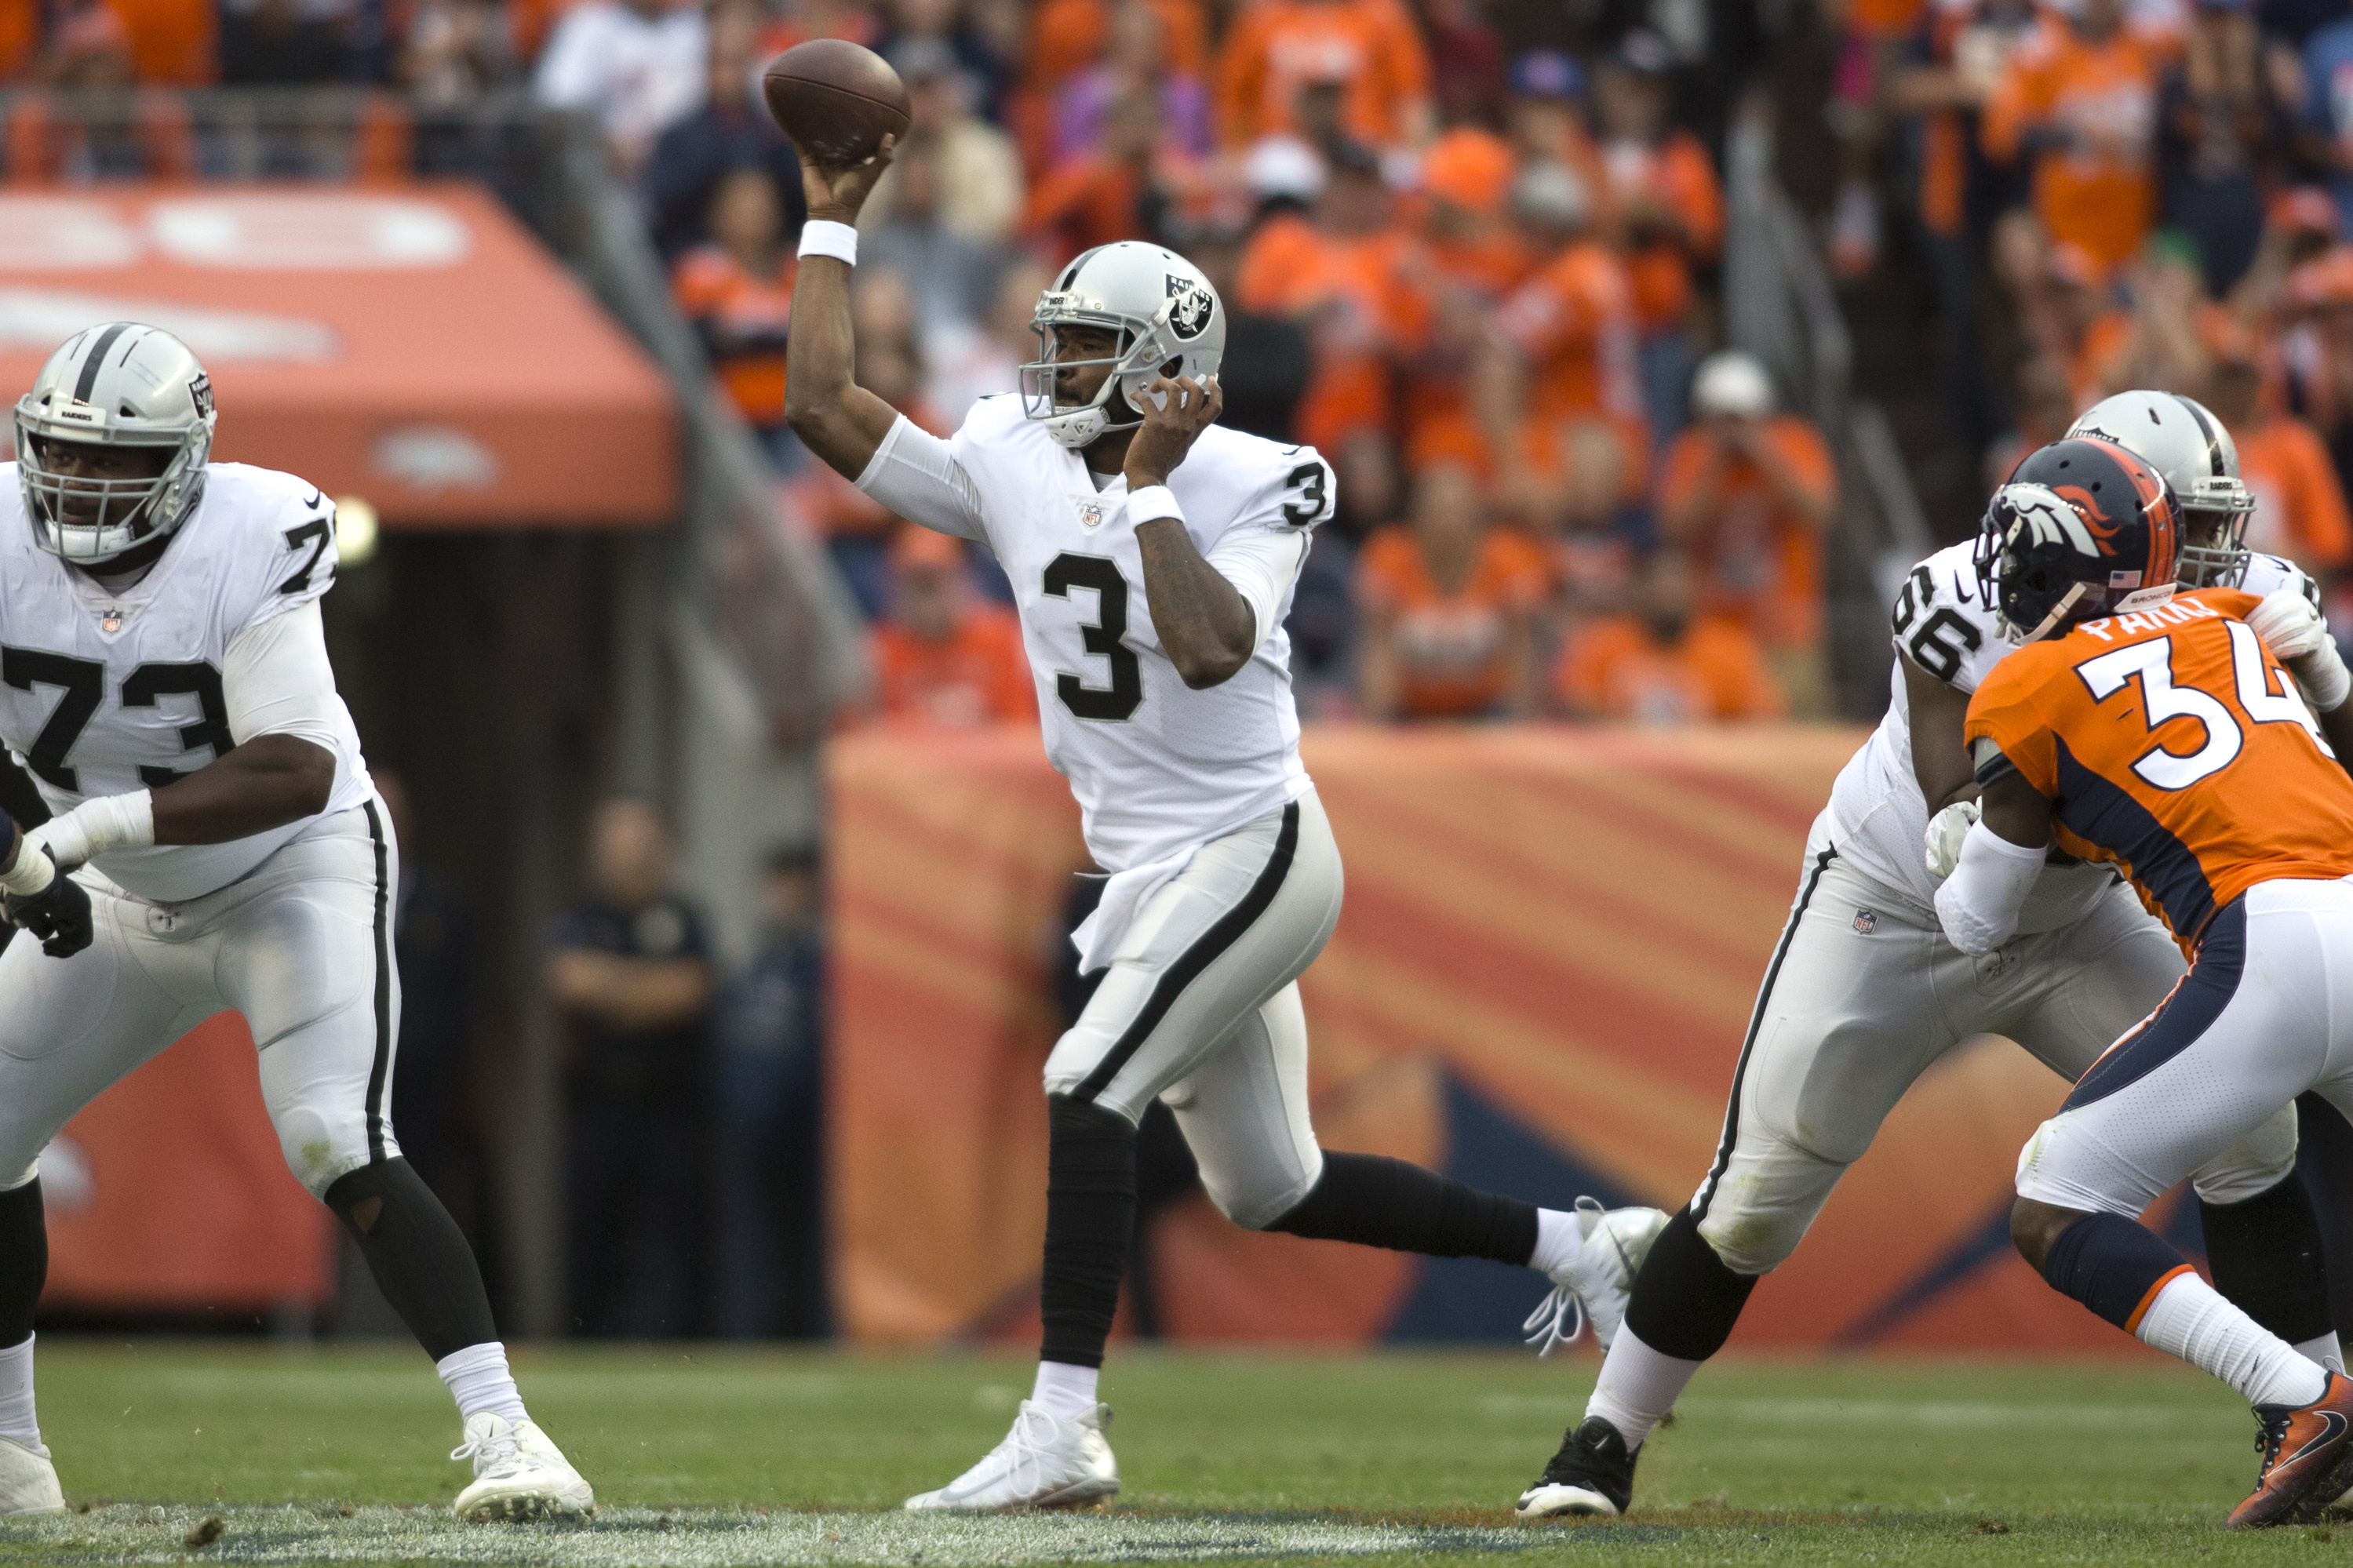 DENVER, CO - OCTOBER 01: Oakland Raiders quarterback EJ Manuel (3) throws the ball during the Oakland Raiders vs. Denver Broncos football game on October 1, 2017 at Sports Authority Field in Denver, CO. 